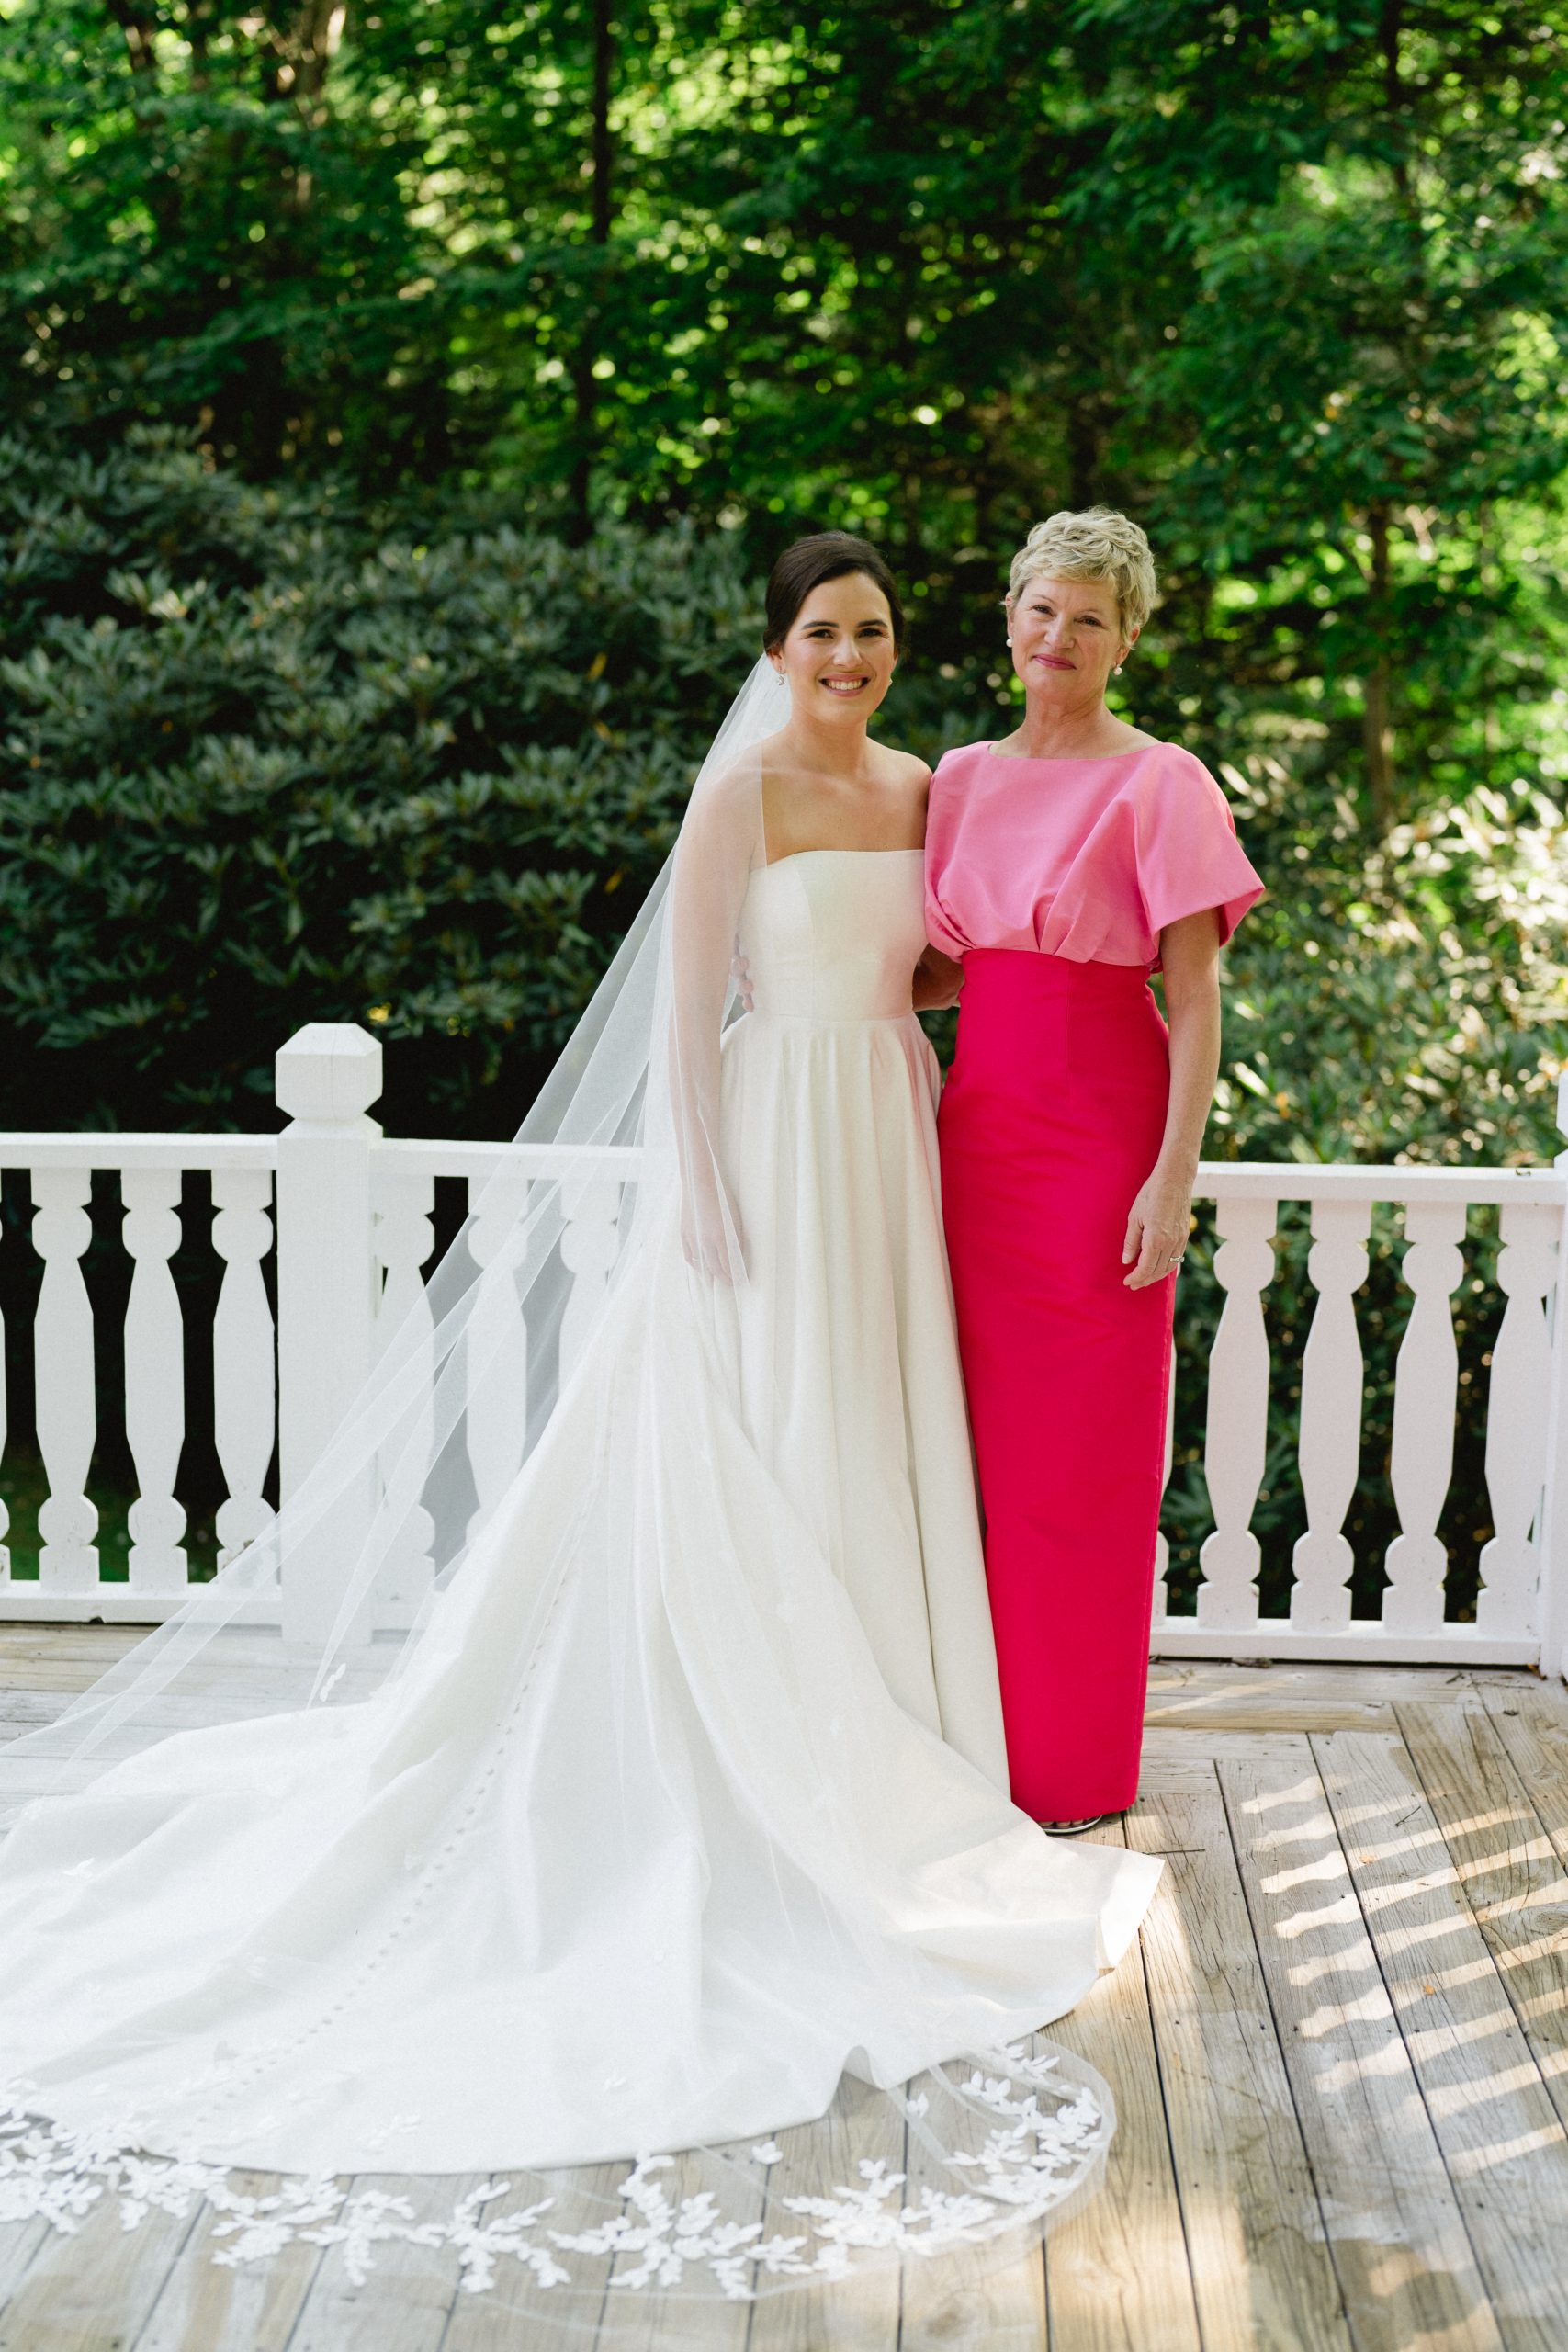  Olivia and Lou, her mother, found the perfect wedding gown and veil together, simple and elegant.
